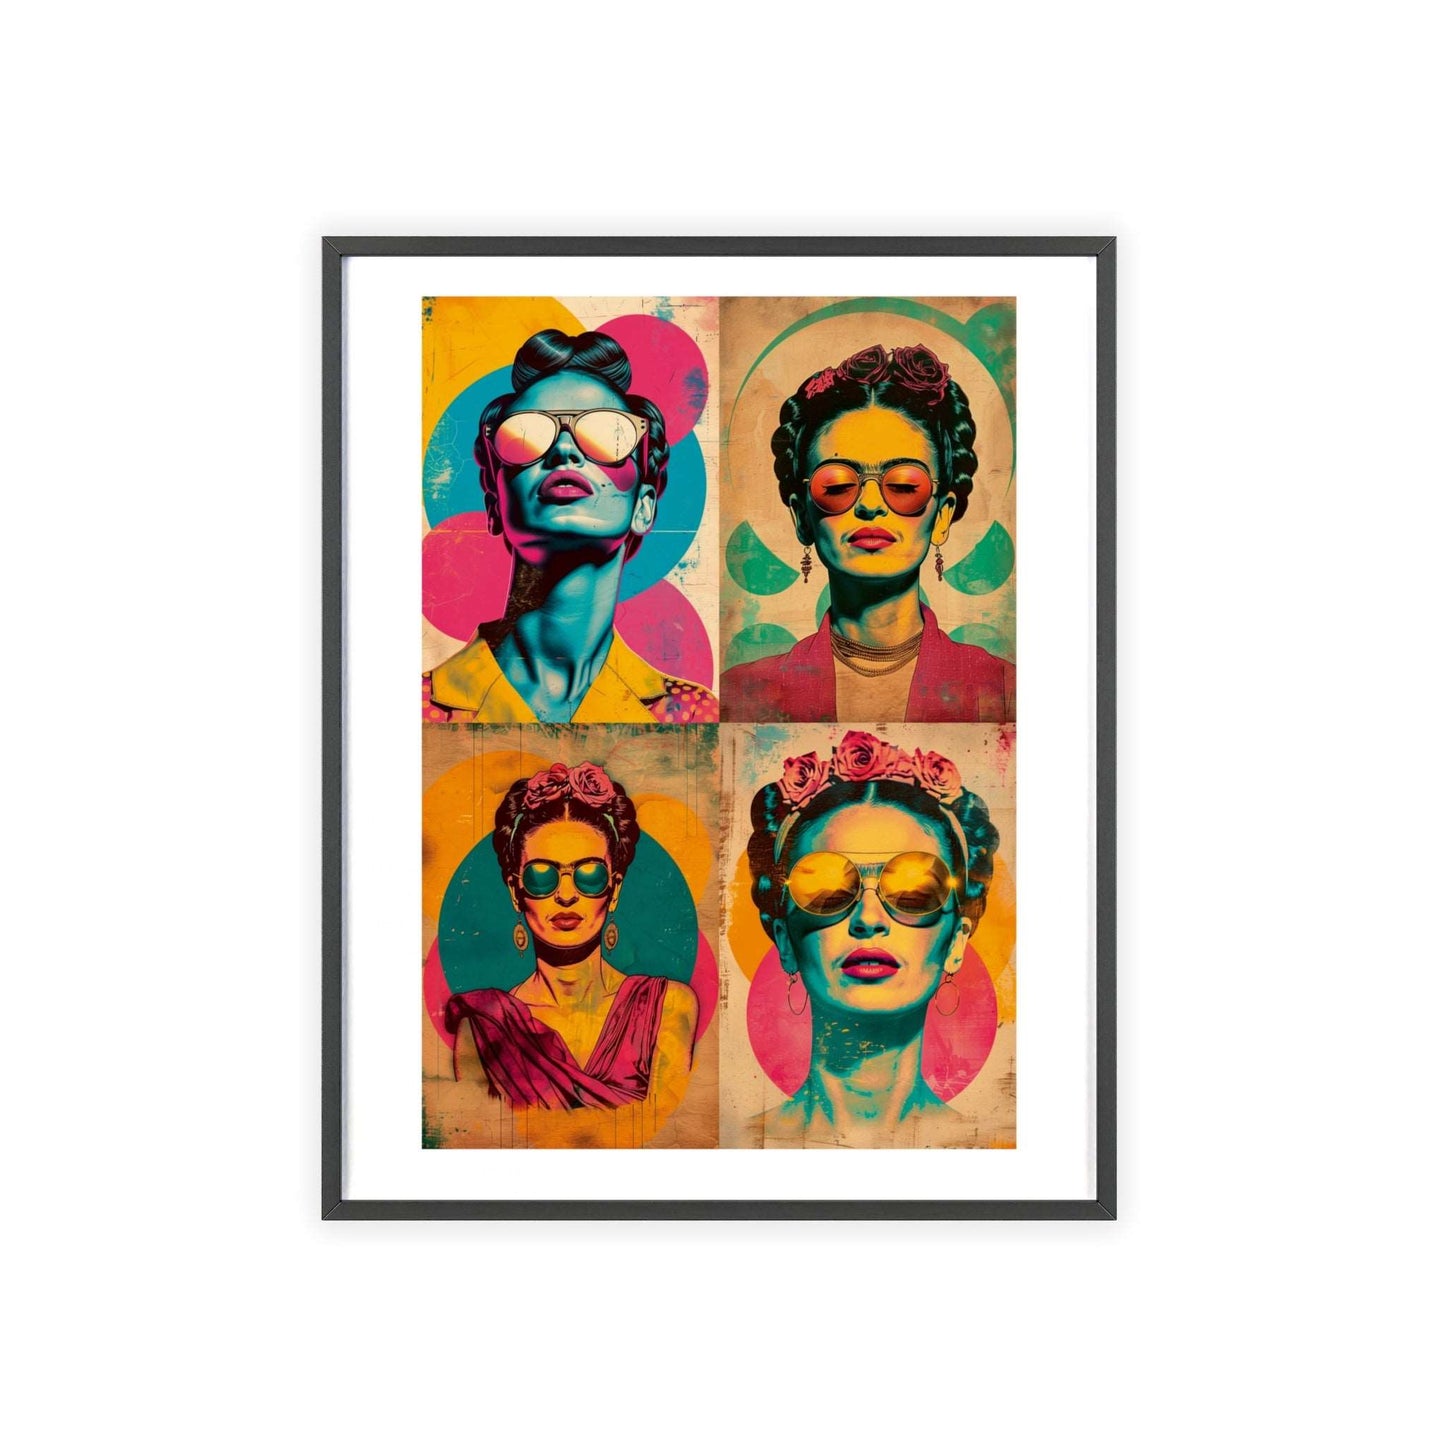 Framed poster featuring a four-panel pop art collage of Frida Kahlo in various poses. Each panel depicts Frida with sunglasses, flowers, and bold outlines against a colorful background. The artwork uses focus stacking and neopop iconography, creating a dynamic composition.